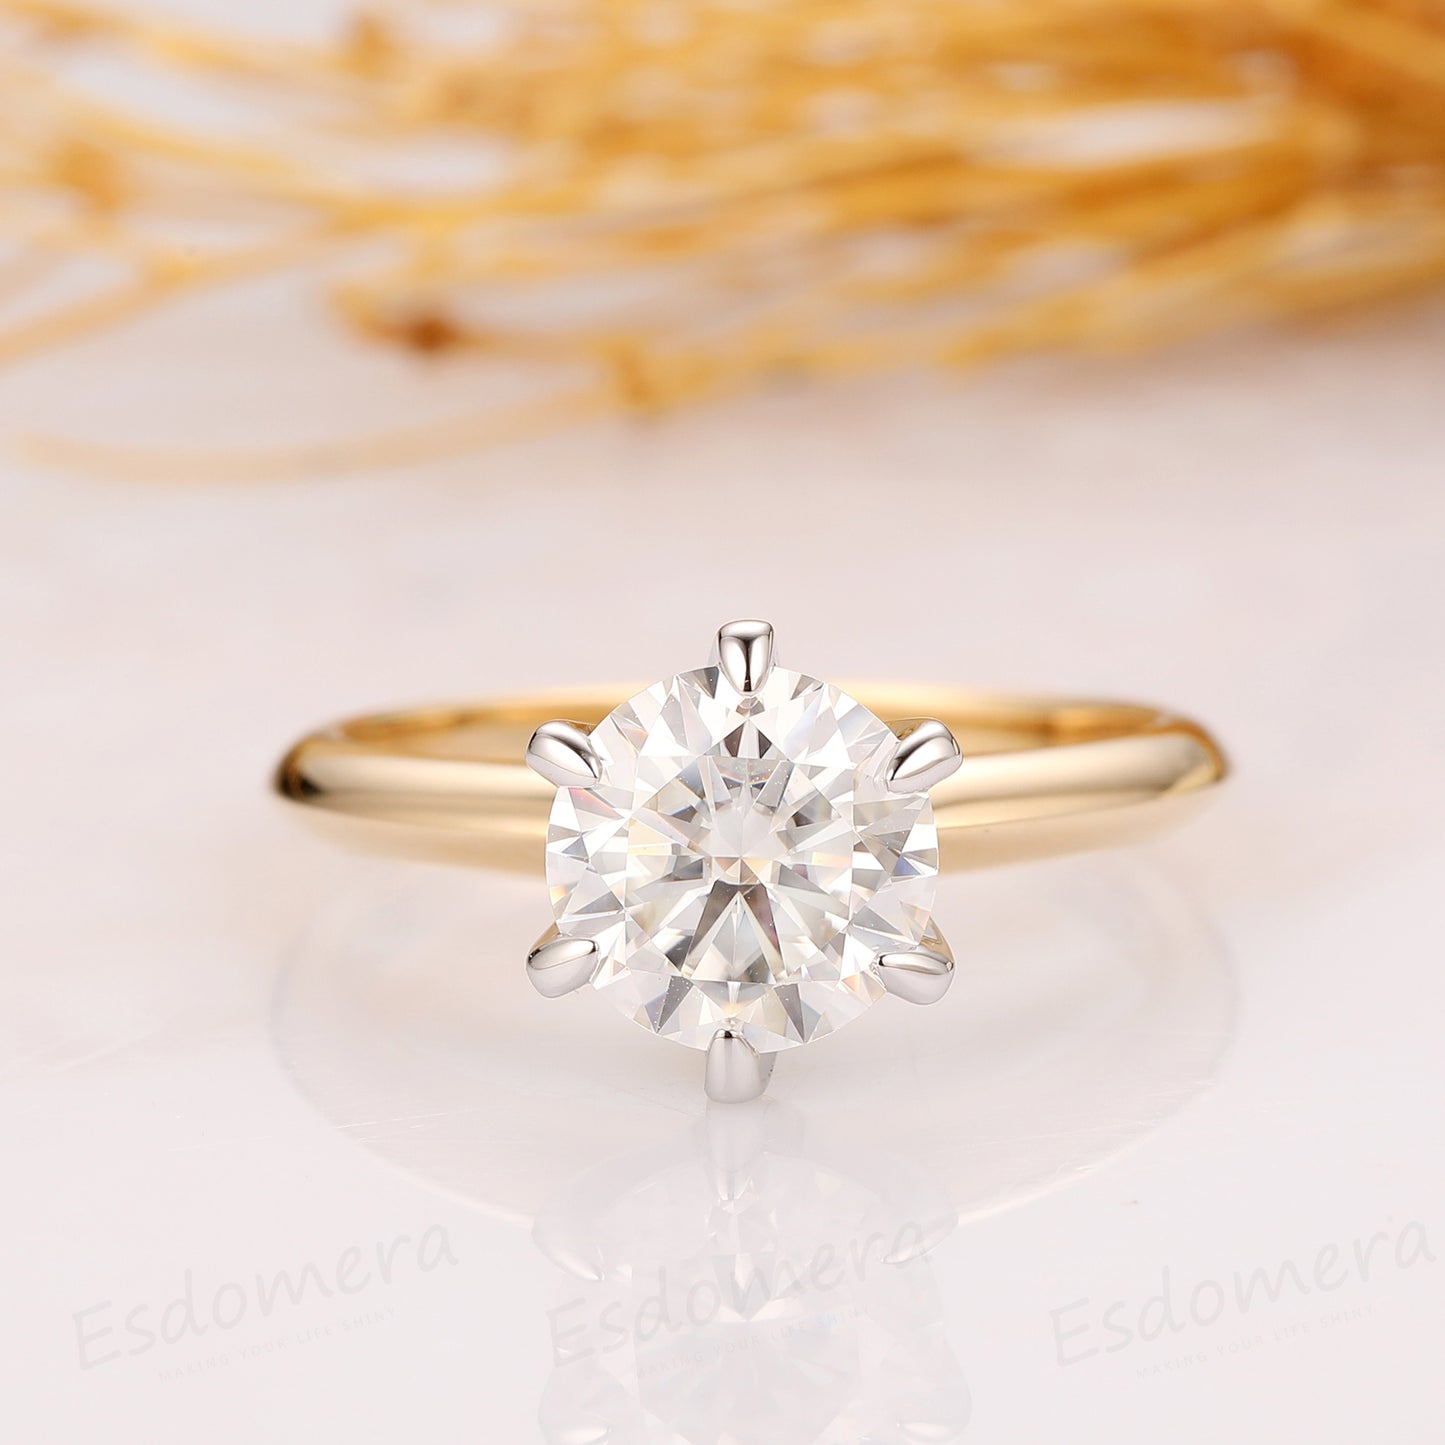 2CT Round Cut Moissanite Engagement Ring, Solitaire Ring Design, 14k Two Tone Gold Ring